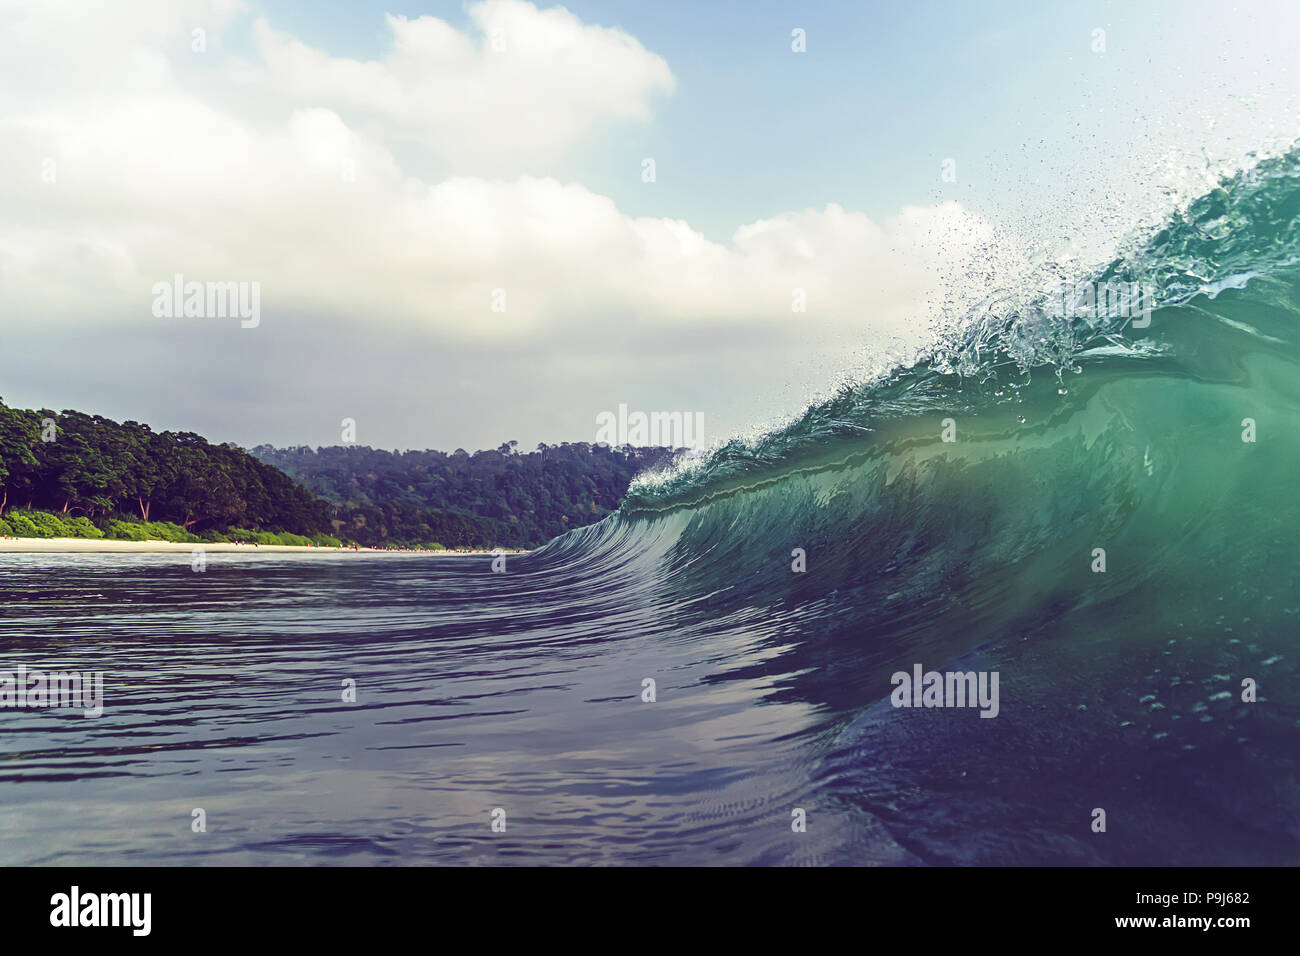 Looking at a barreling wave break in an empty line up. under the crest of a wave. crest of wave Stock Photo